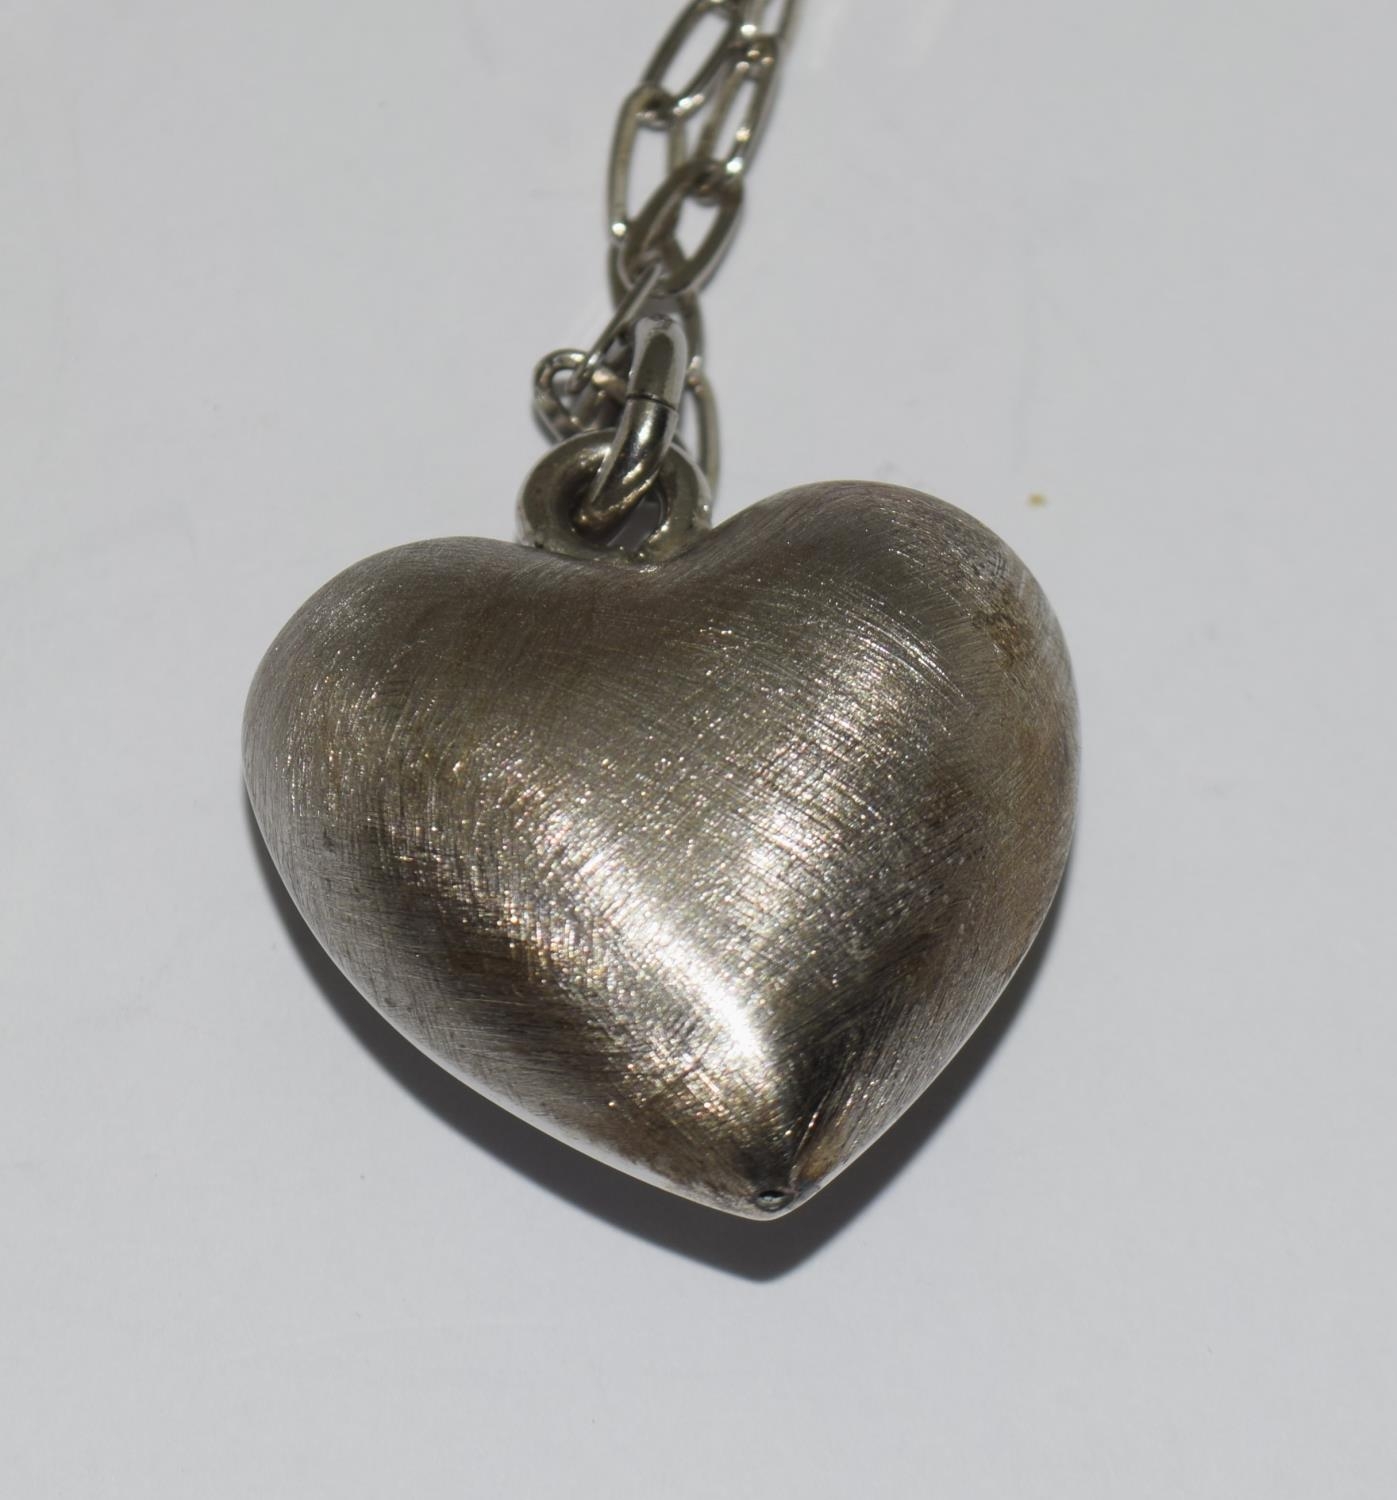 Large 925 silver puffy heart pendant on long chain. - Image 3 of 3